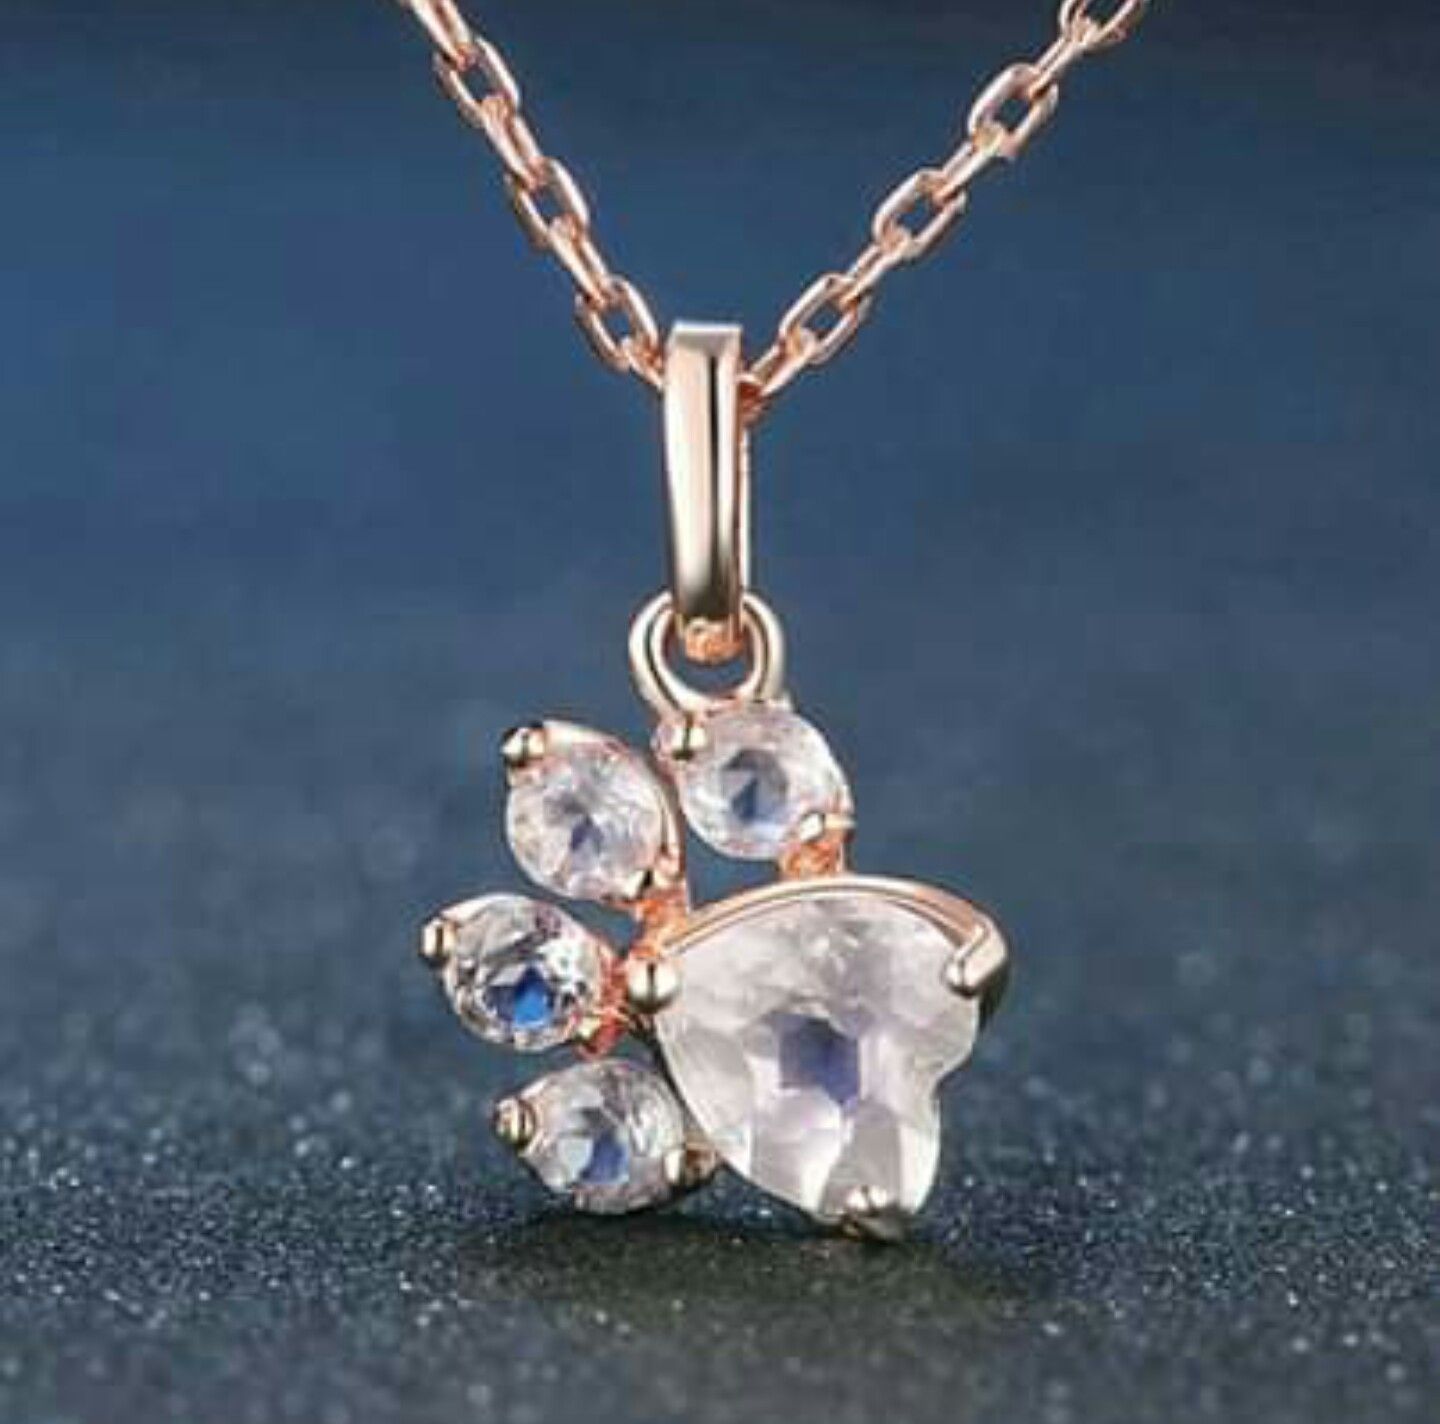 Bear's Paw Pendant 925 Sterling Silver Necklace